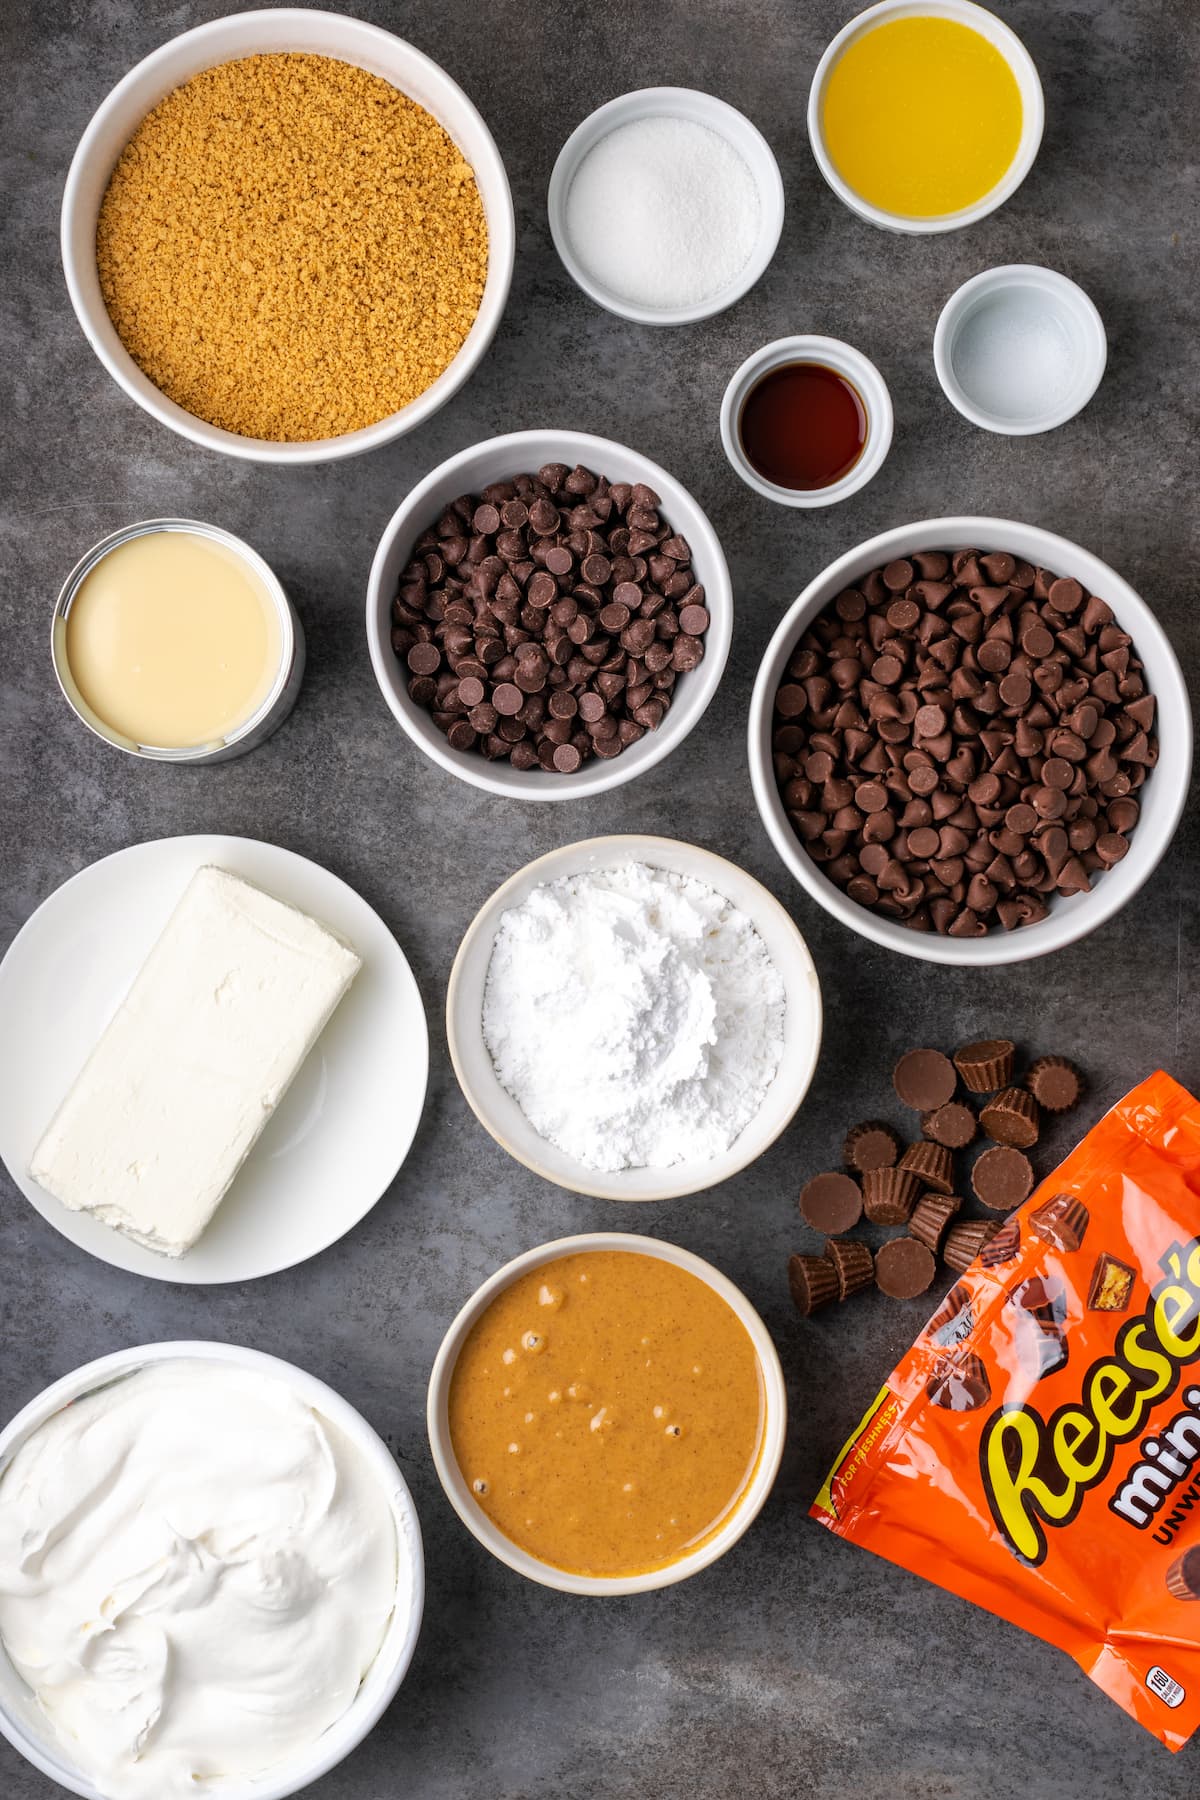 The ingredients for Reese's fudge pie.